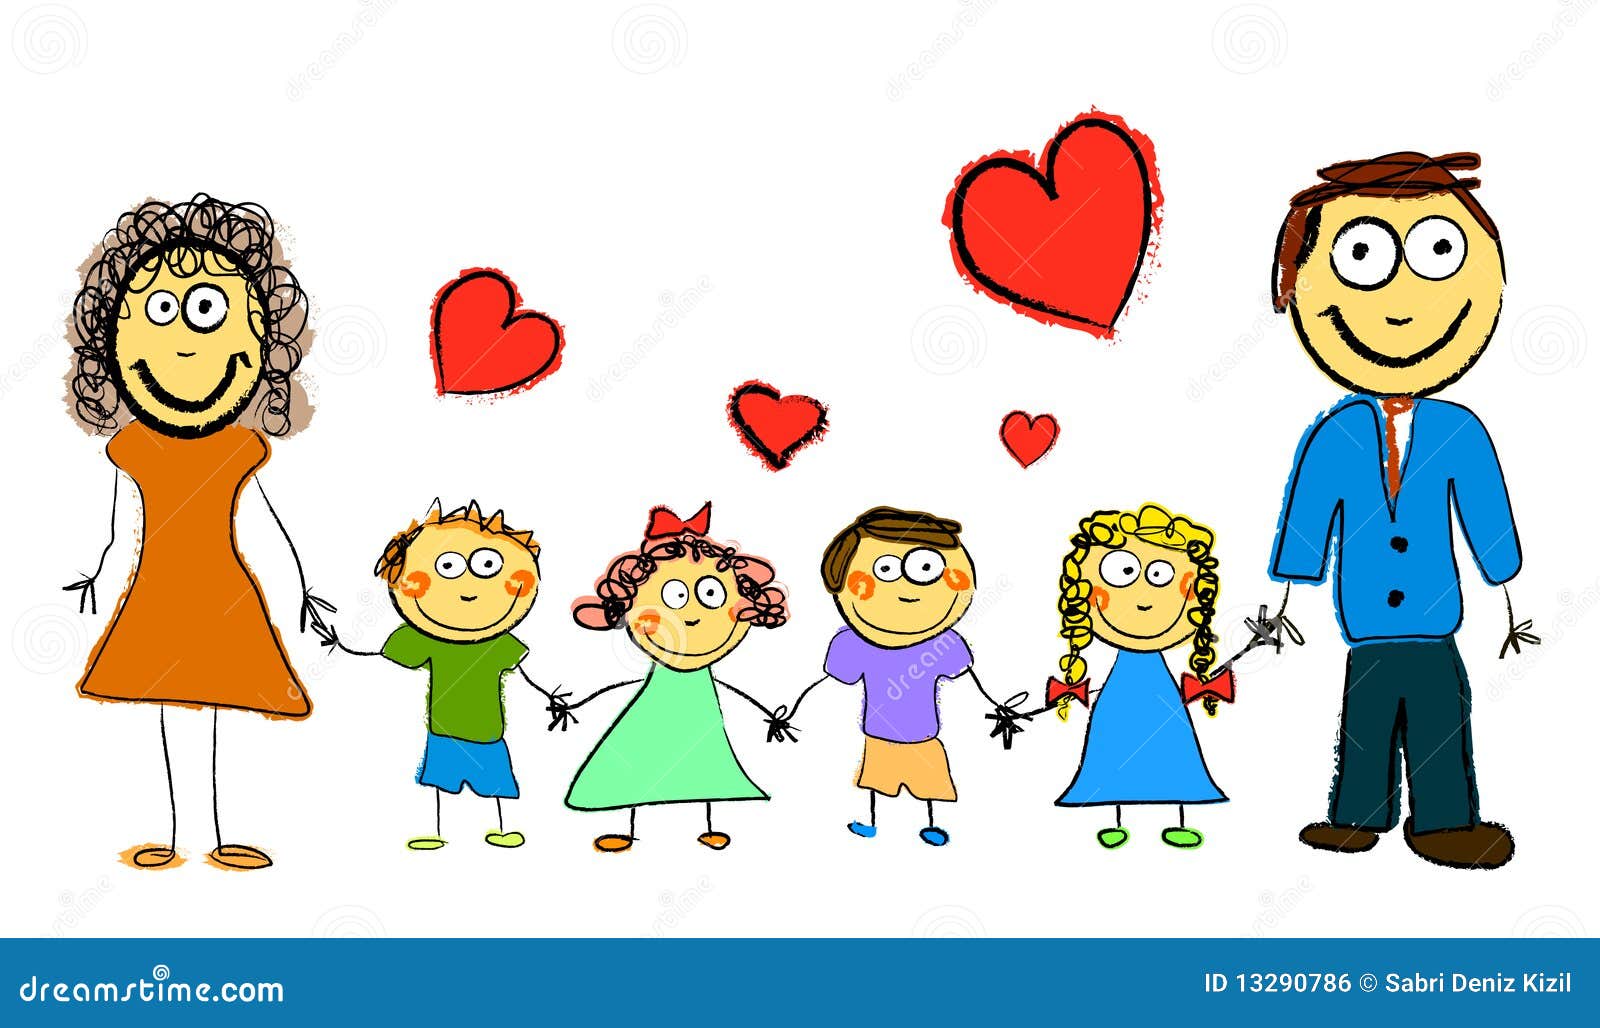 big family clipart images - photo #48